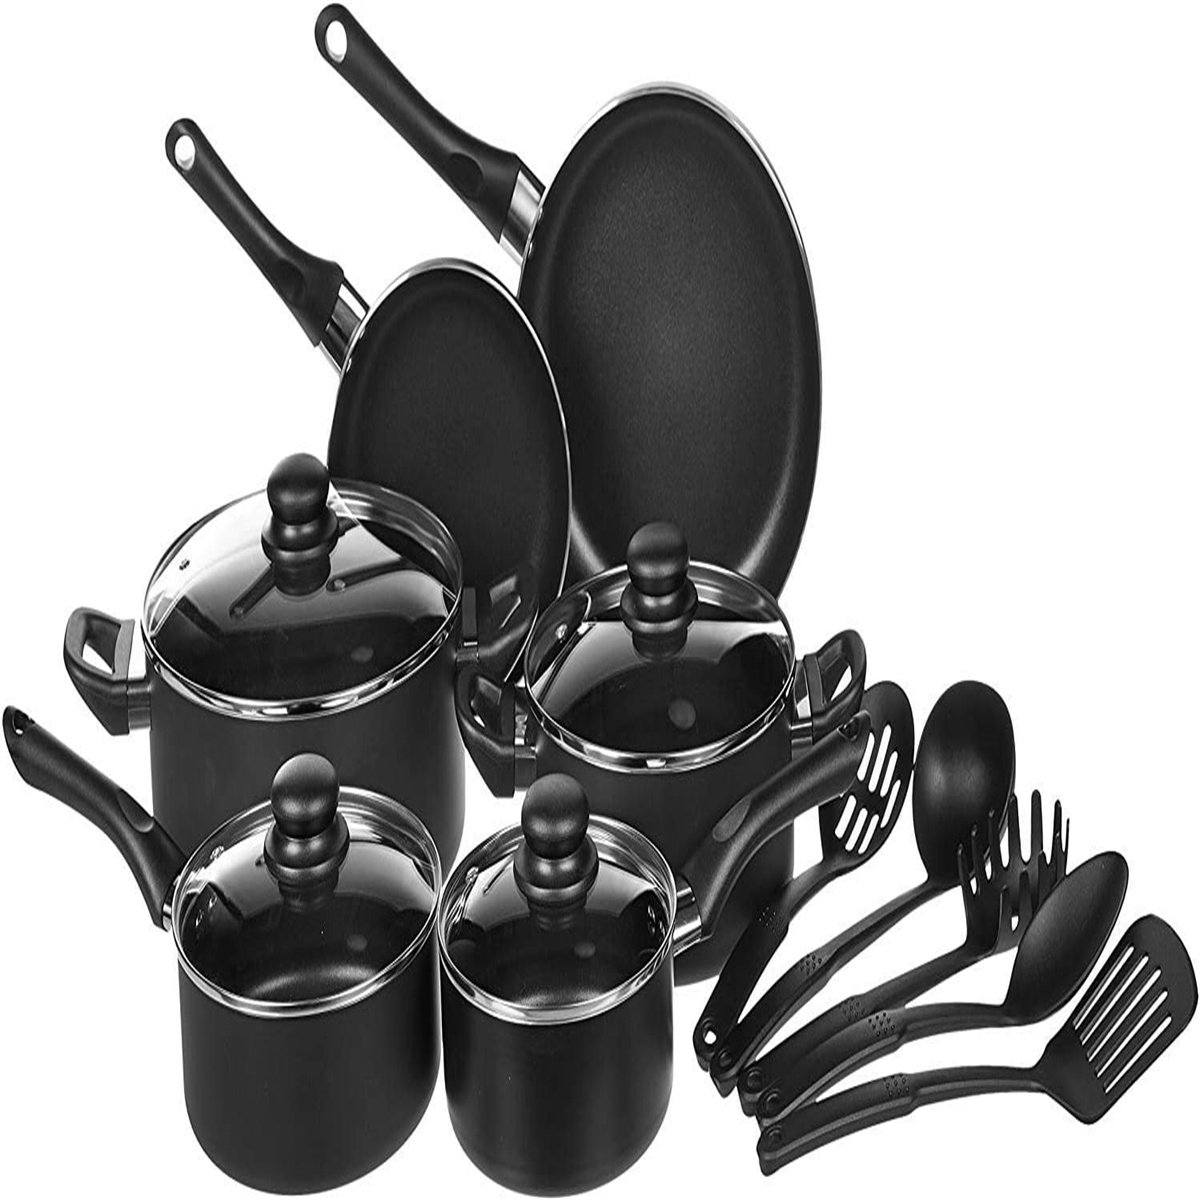 SereneLife 15 Piece Pots and Pans Home Non Stick Chef Kitchenware